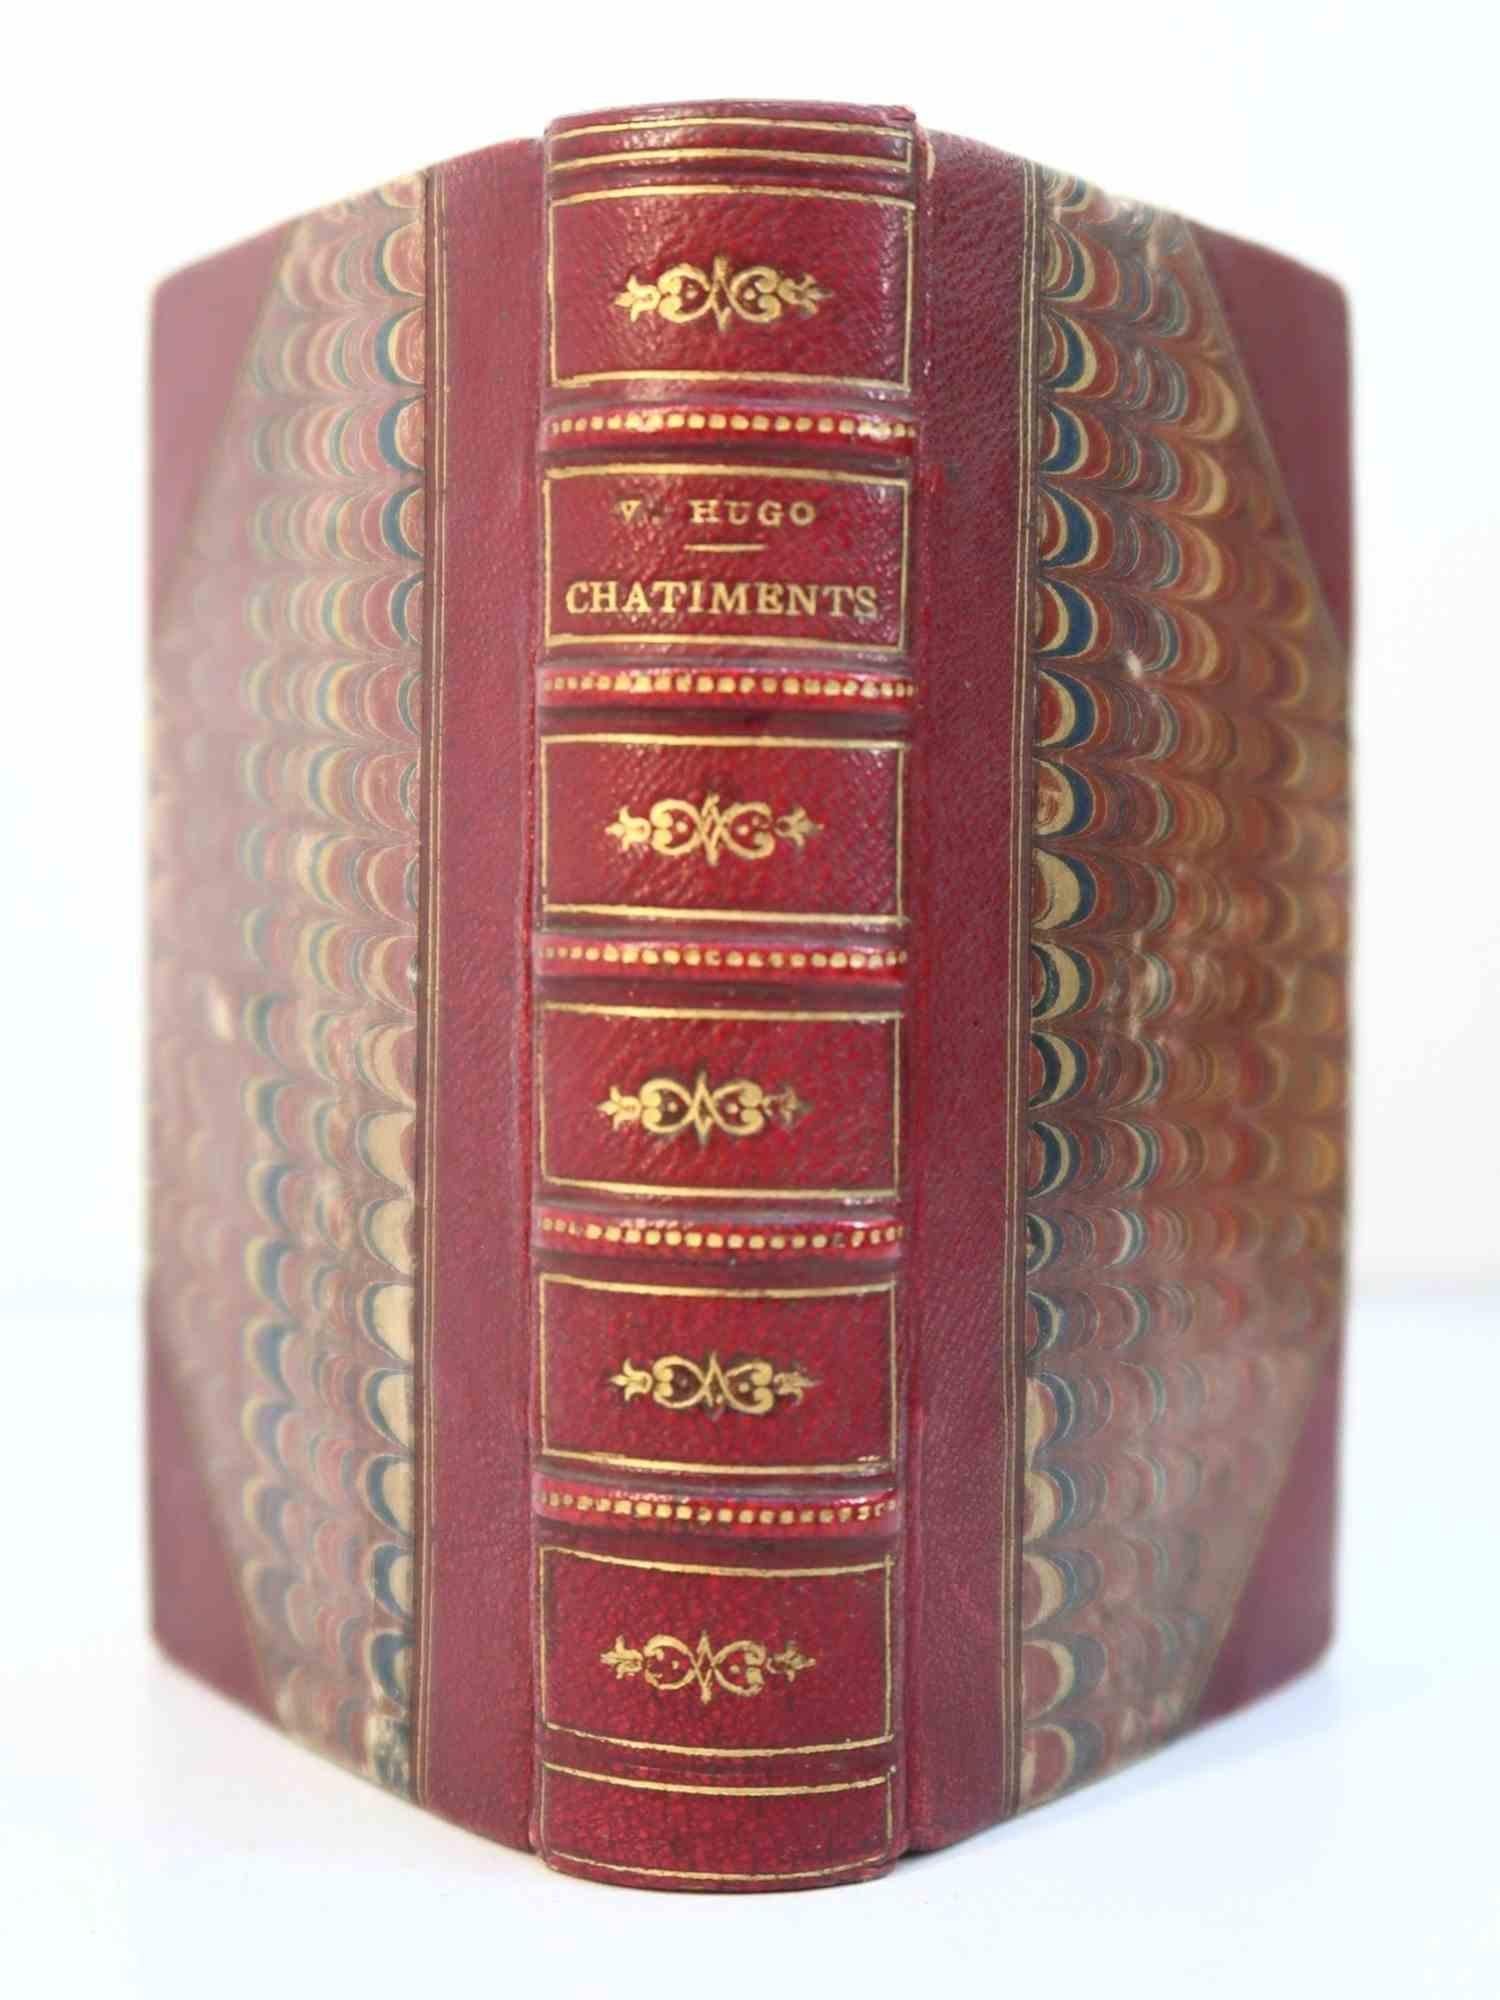 Châtiments is a rare book by Victor Hugo published in 1853

Edit by Imprimerie universelle, Saint-Helier – New York, Genève

Original edition in a coeval half leather binding.  

392 pages. In fine condition